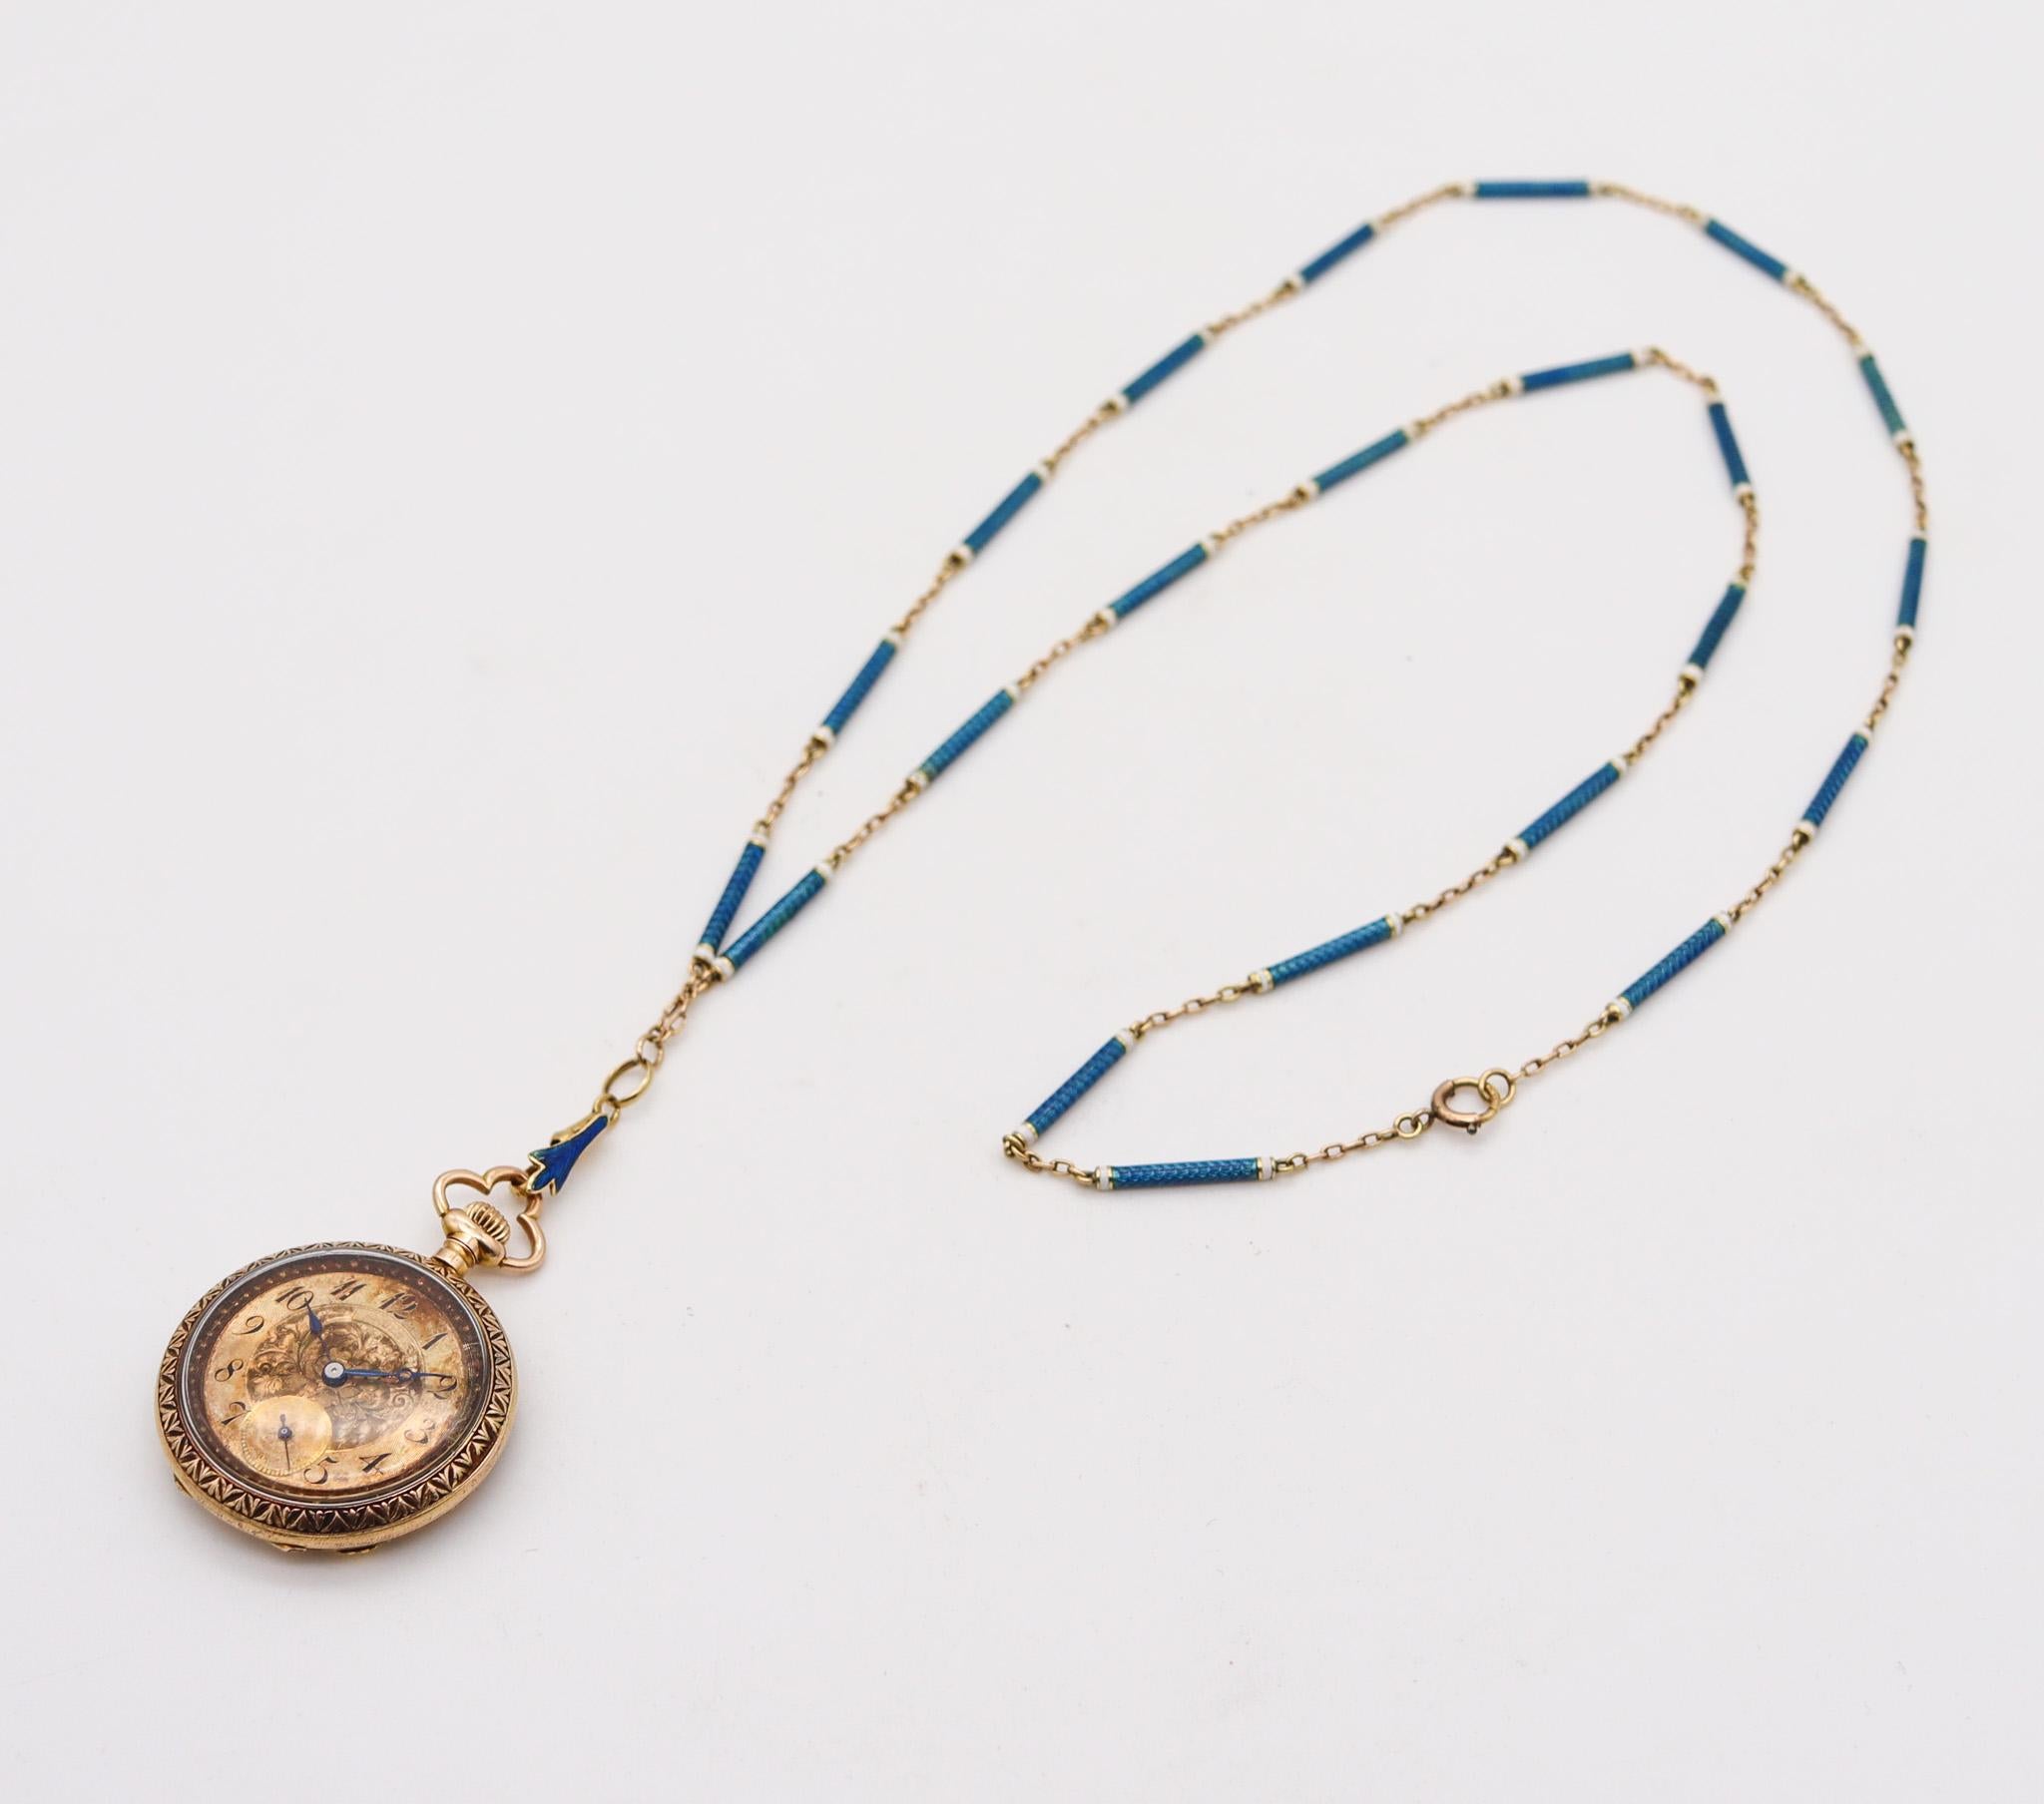 Edwardian 1903 Swiss Necklace Watch In 14Kt Gold With Guilloché Blue Enamel In Excellent Condition For Sale In Miami, FL